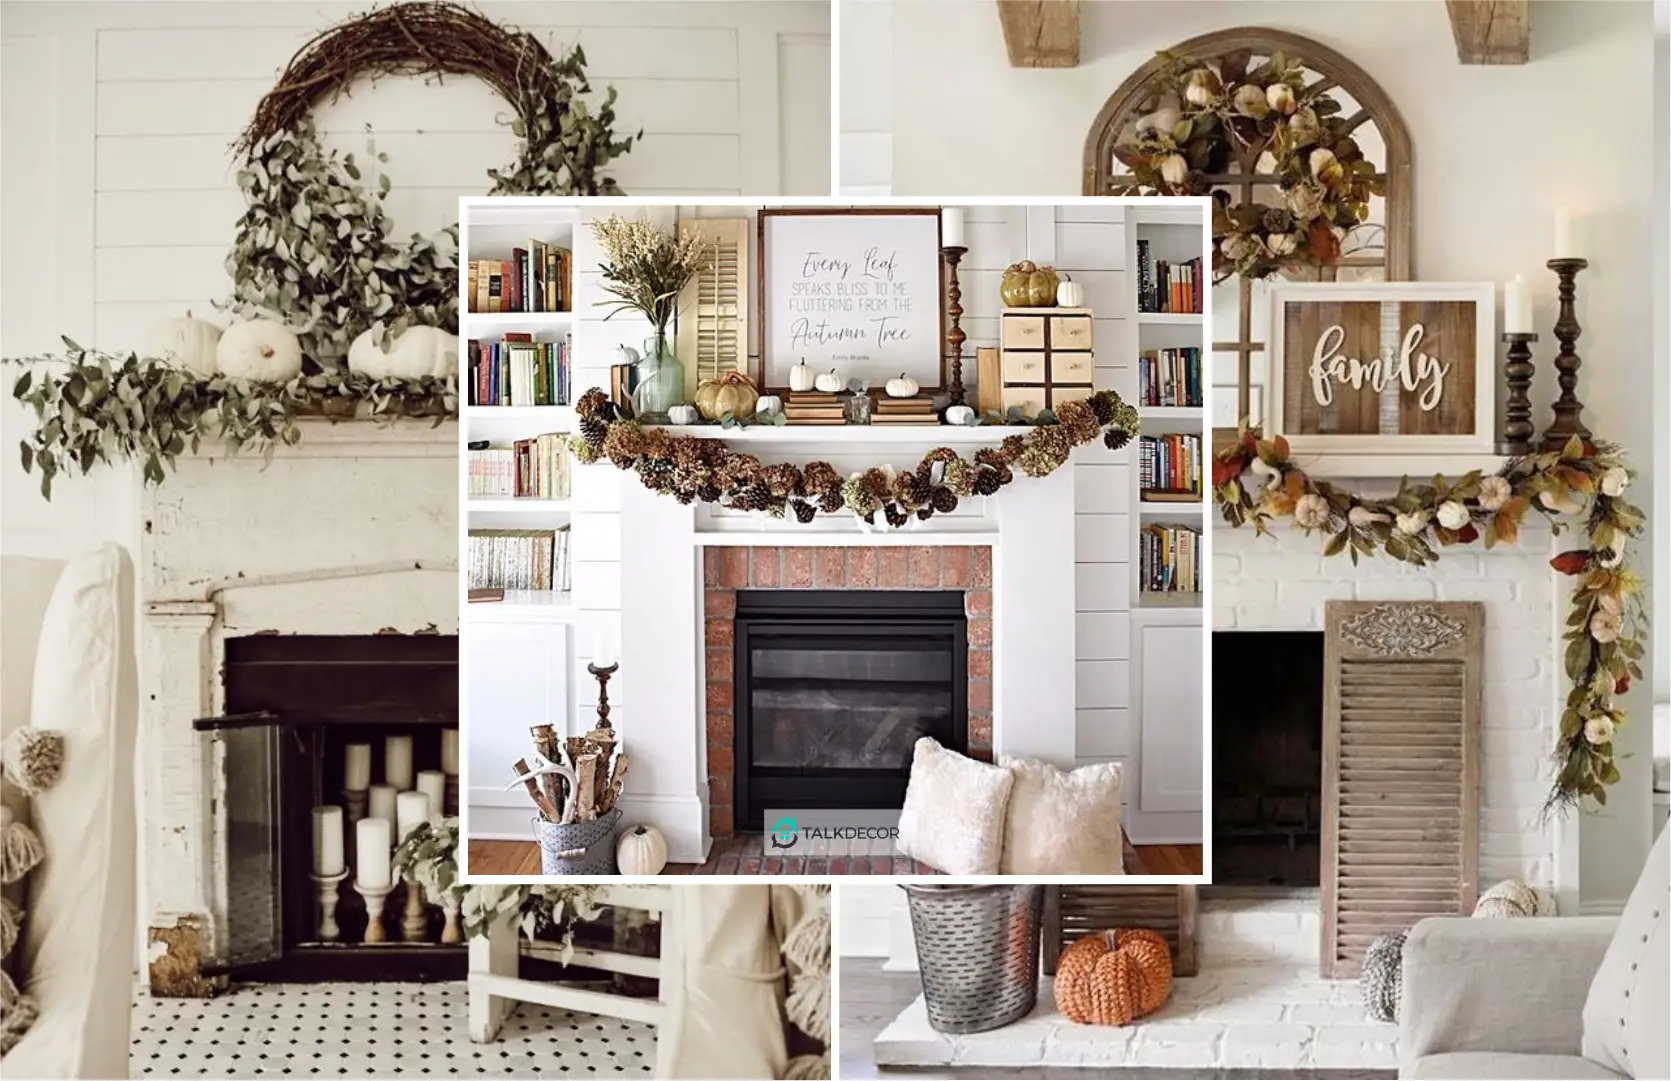 55 Interesting Ideas in Redecorating Your Fireplace to Welcome Fall Season